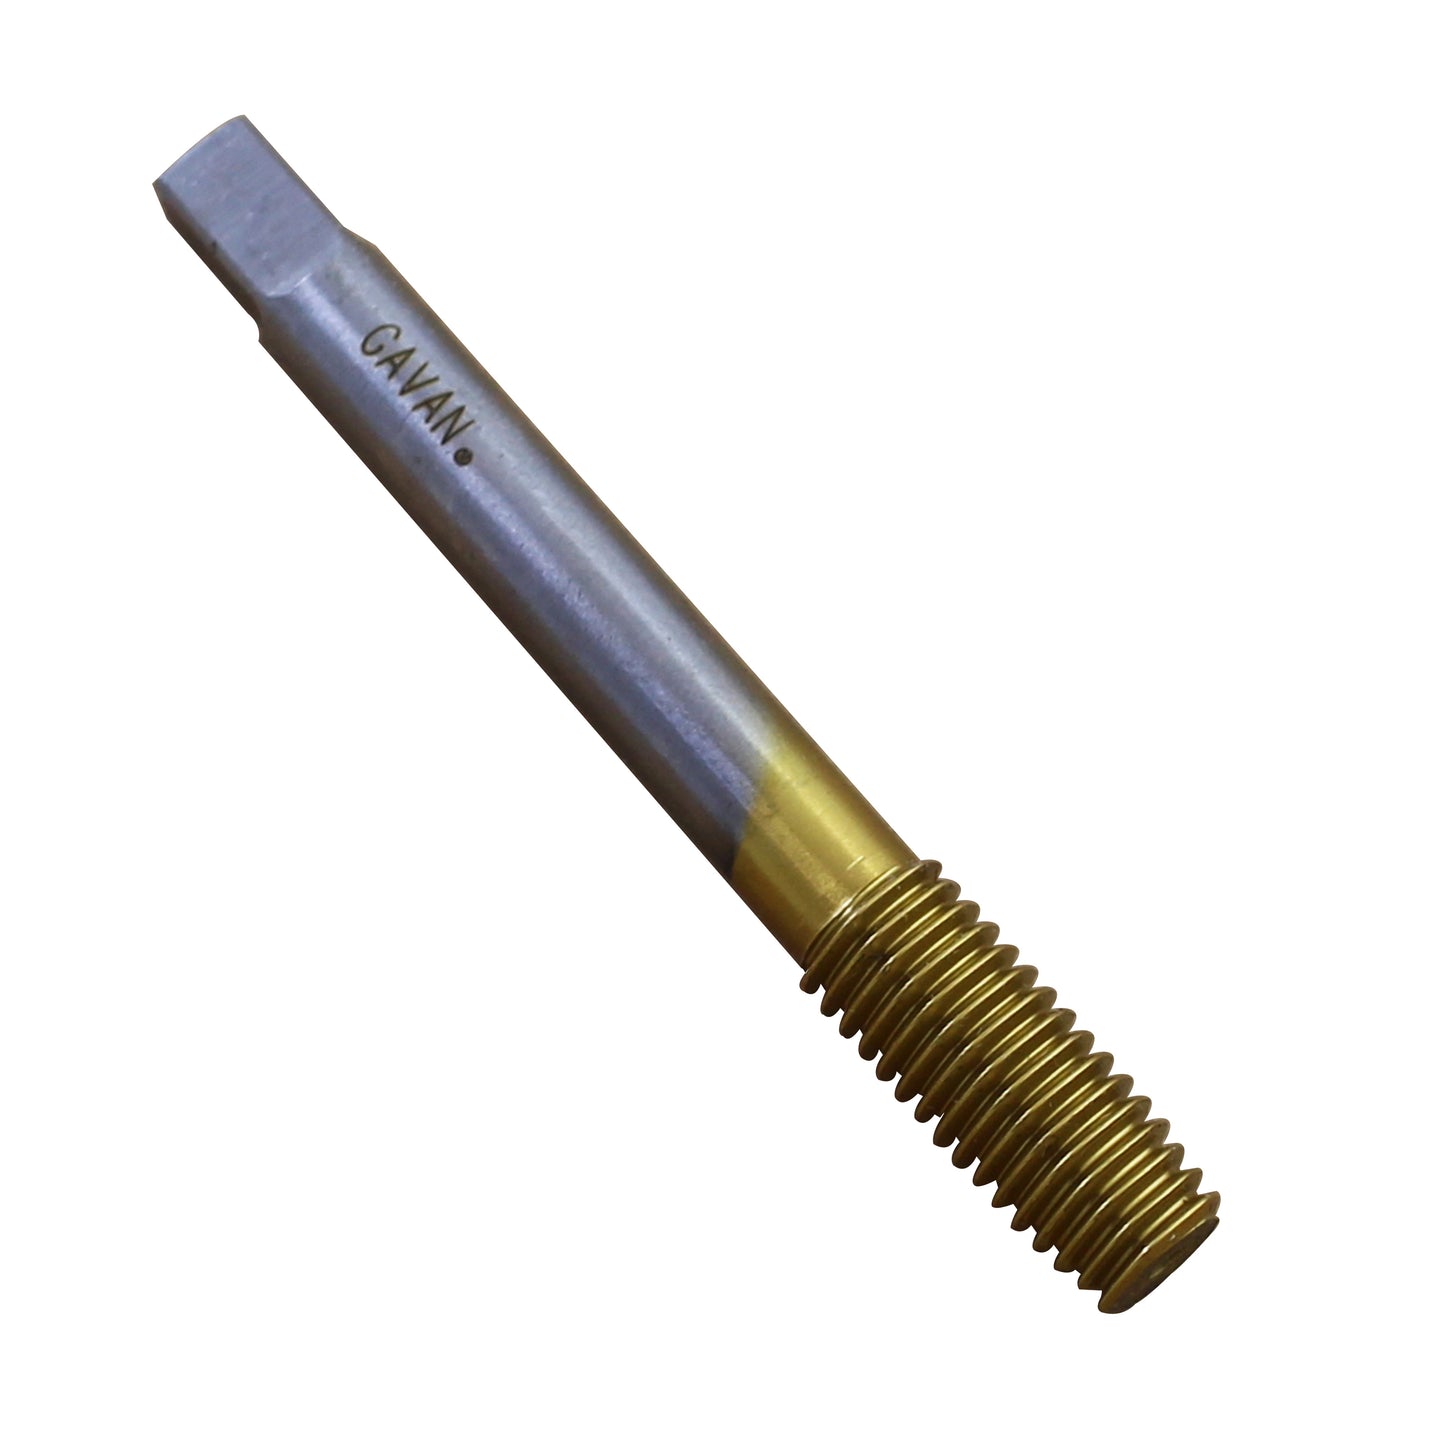 7/16" - 14 HSS Unified Right hand Thread Forming Tap